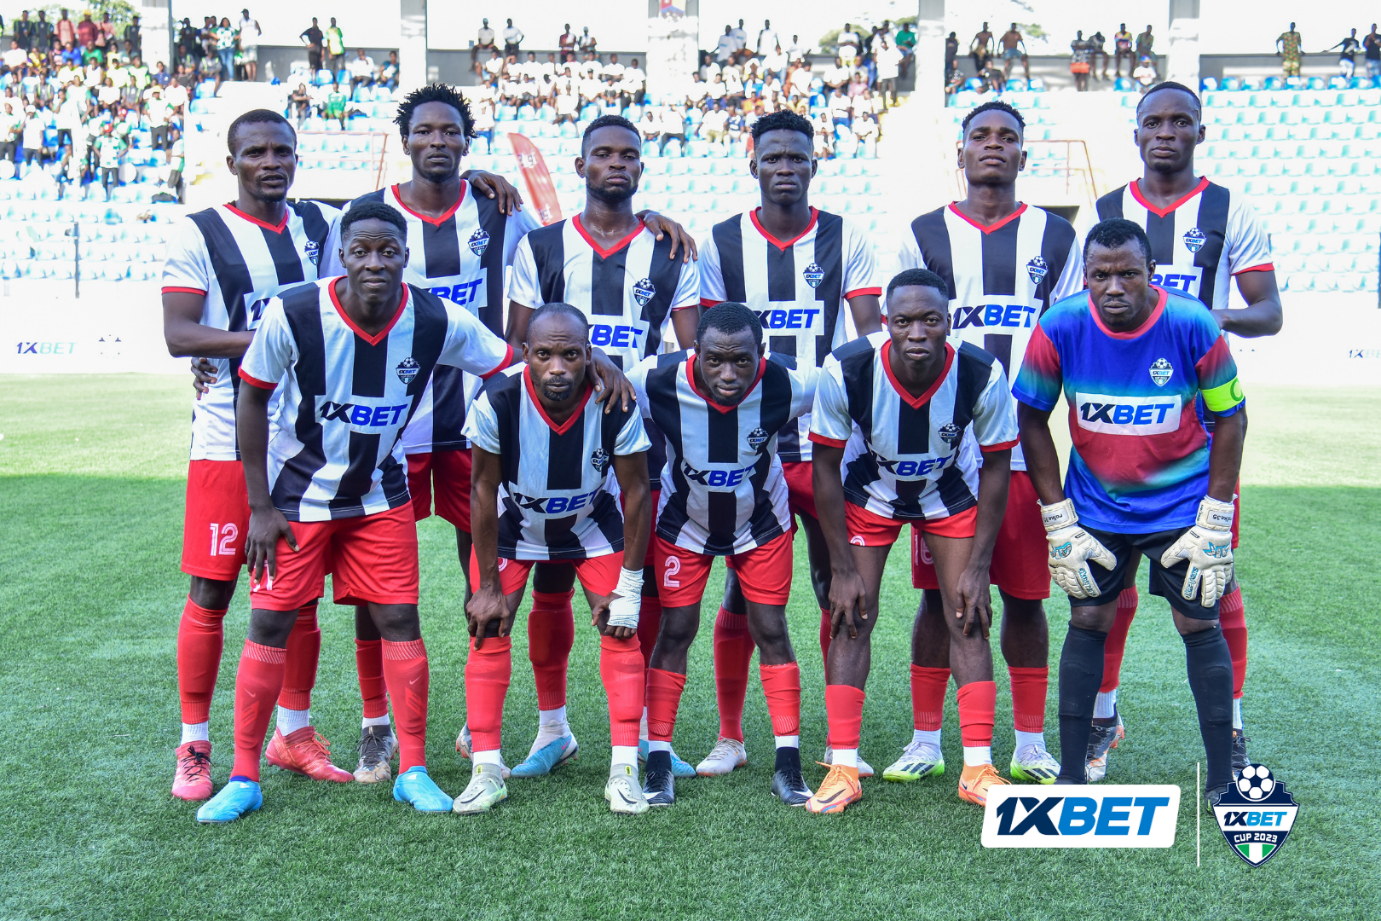 1xBet community football championship: team that won 1,000,000 NGN determined